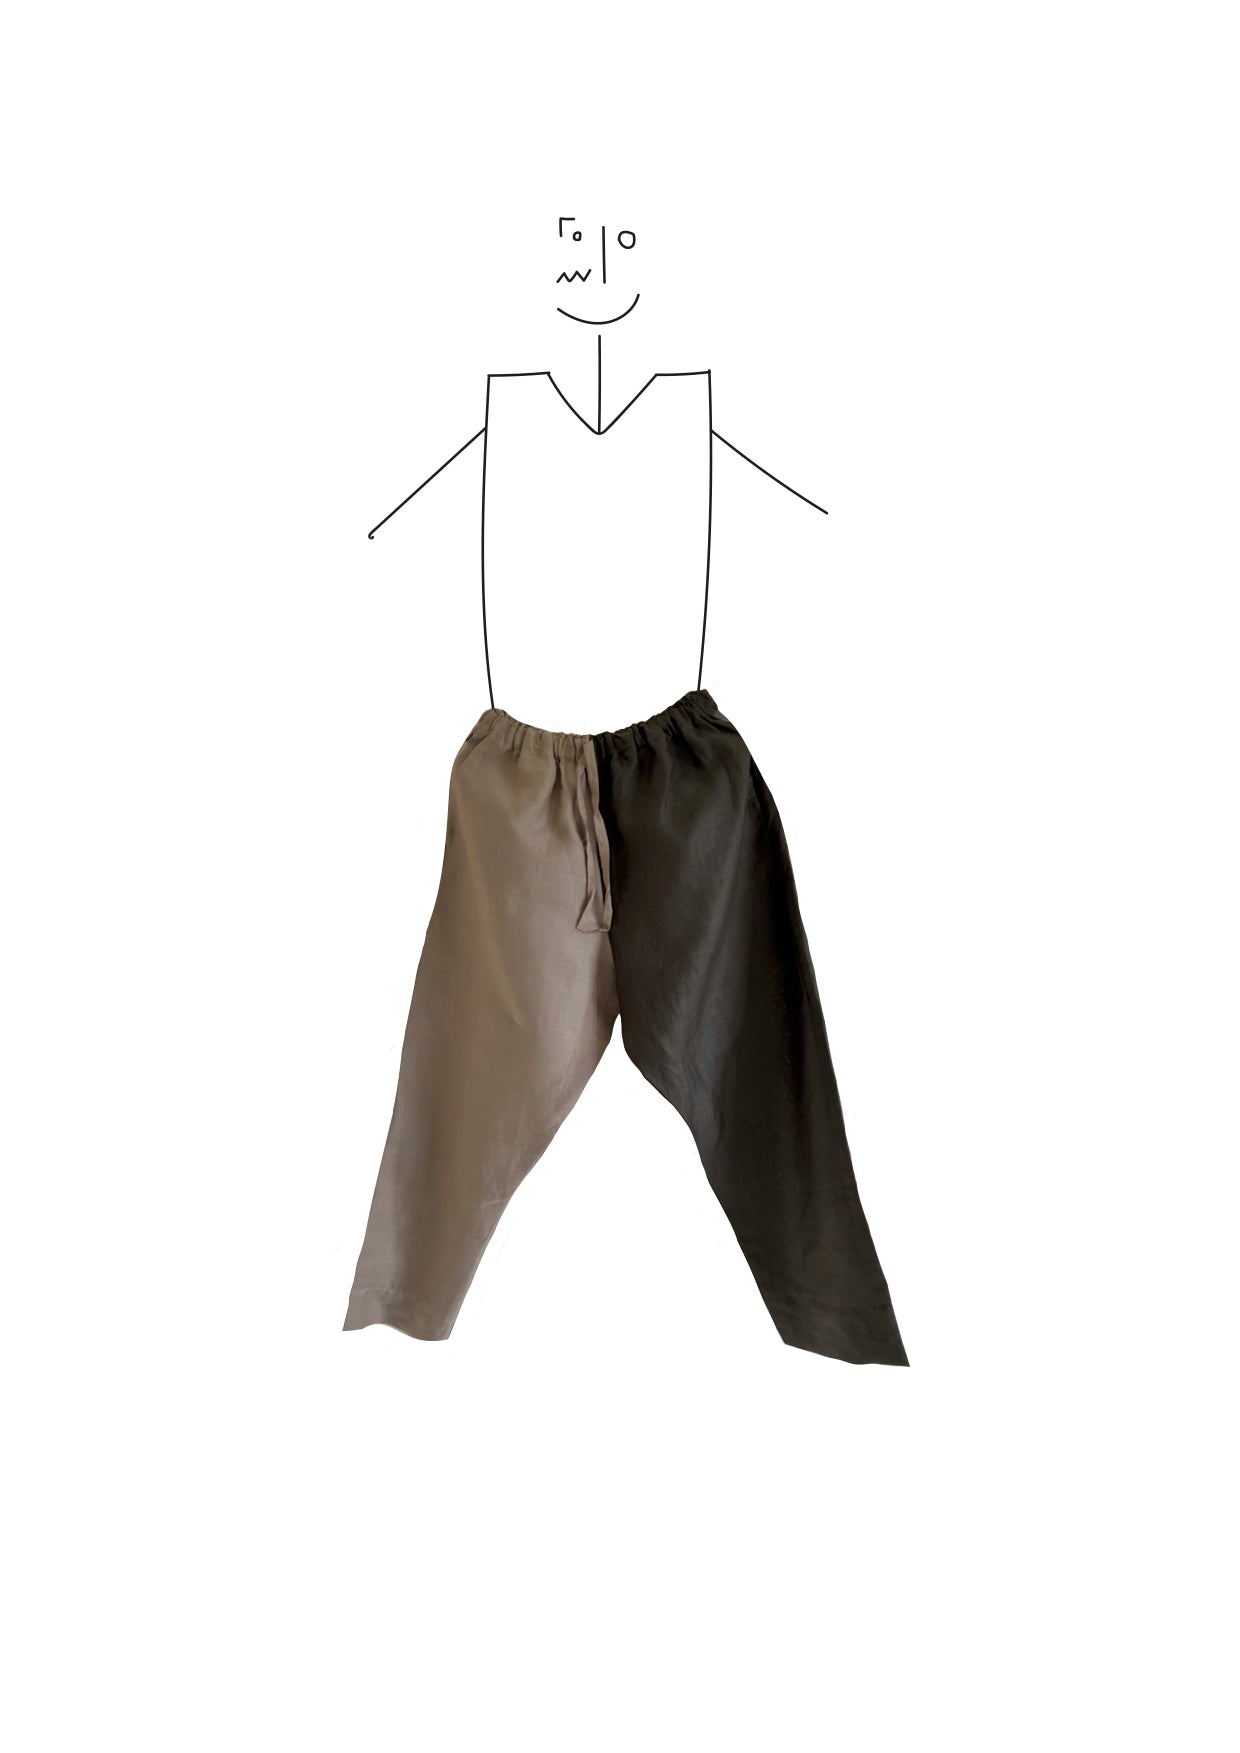 Trousers-half and half beige and green (linen)